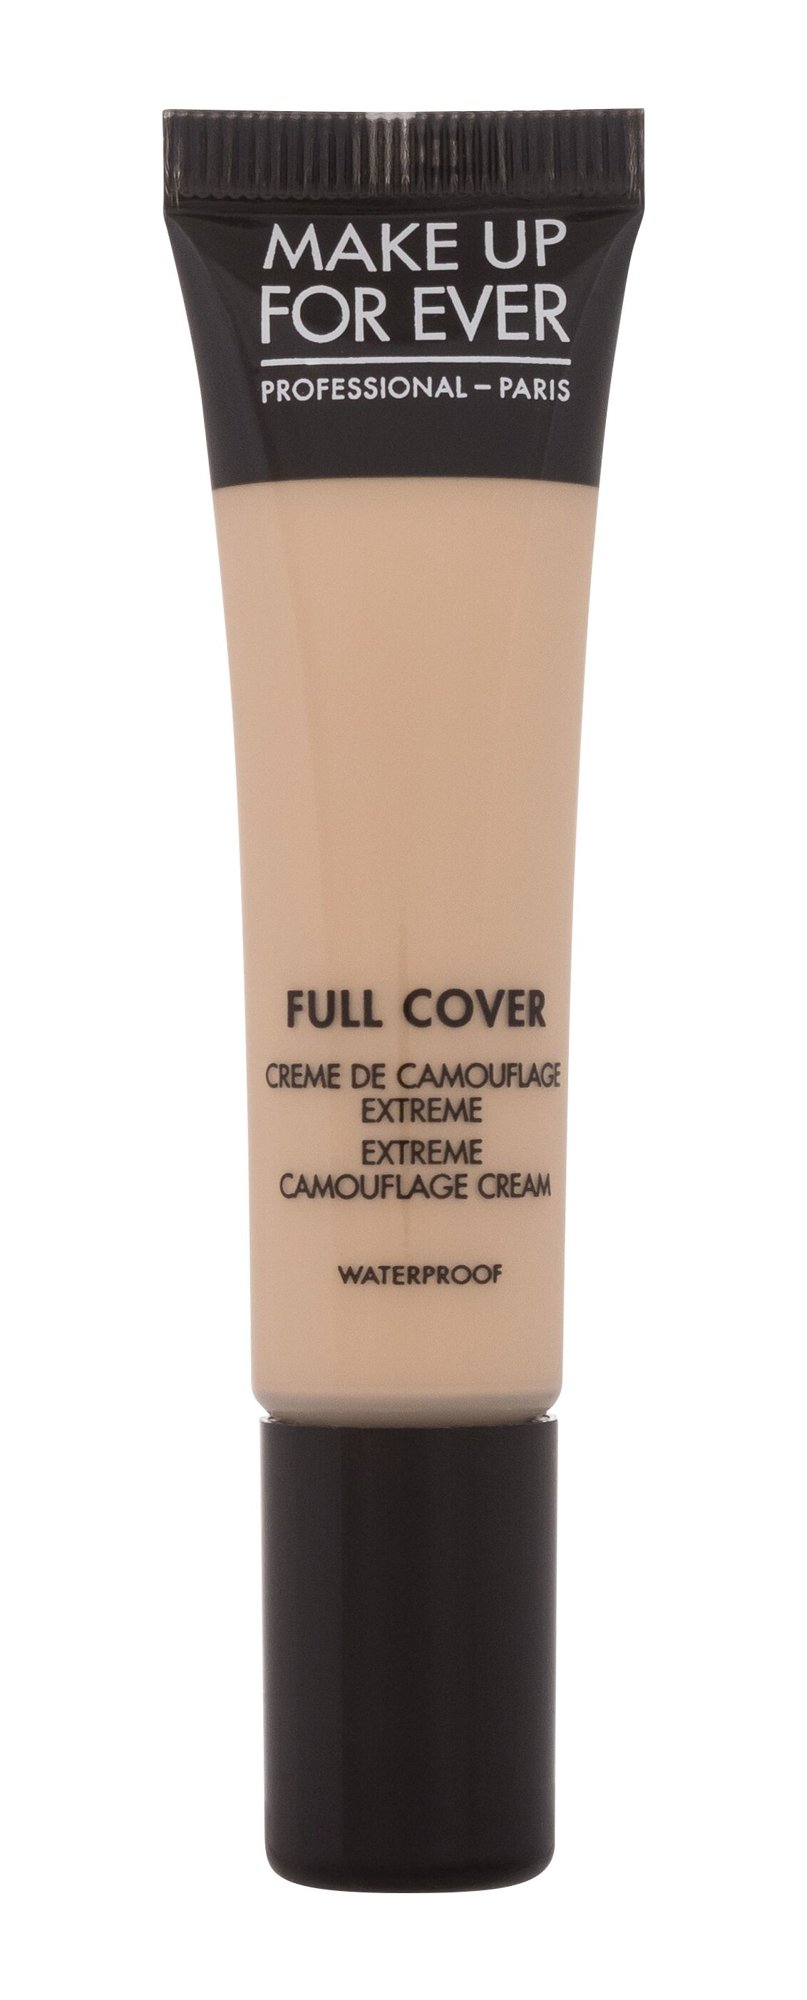 Make Up For Ever Full Cover Extreme Camouflage Cream makiažo pagrindas